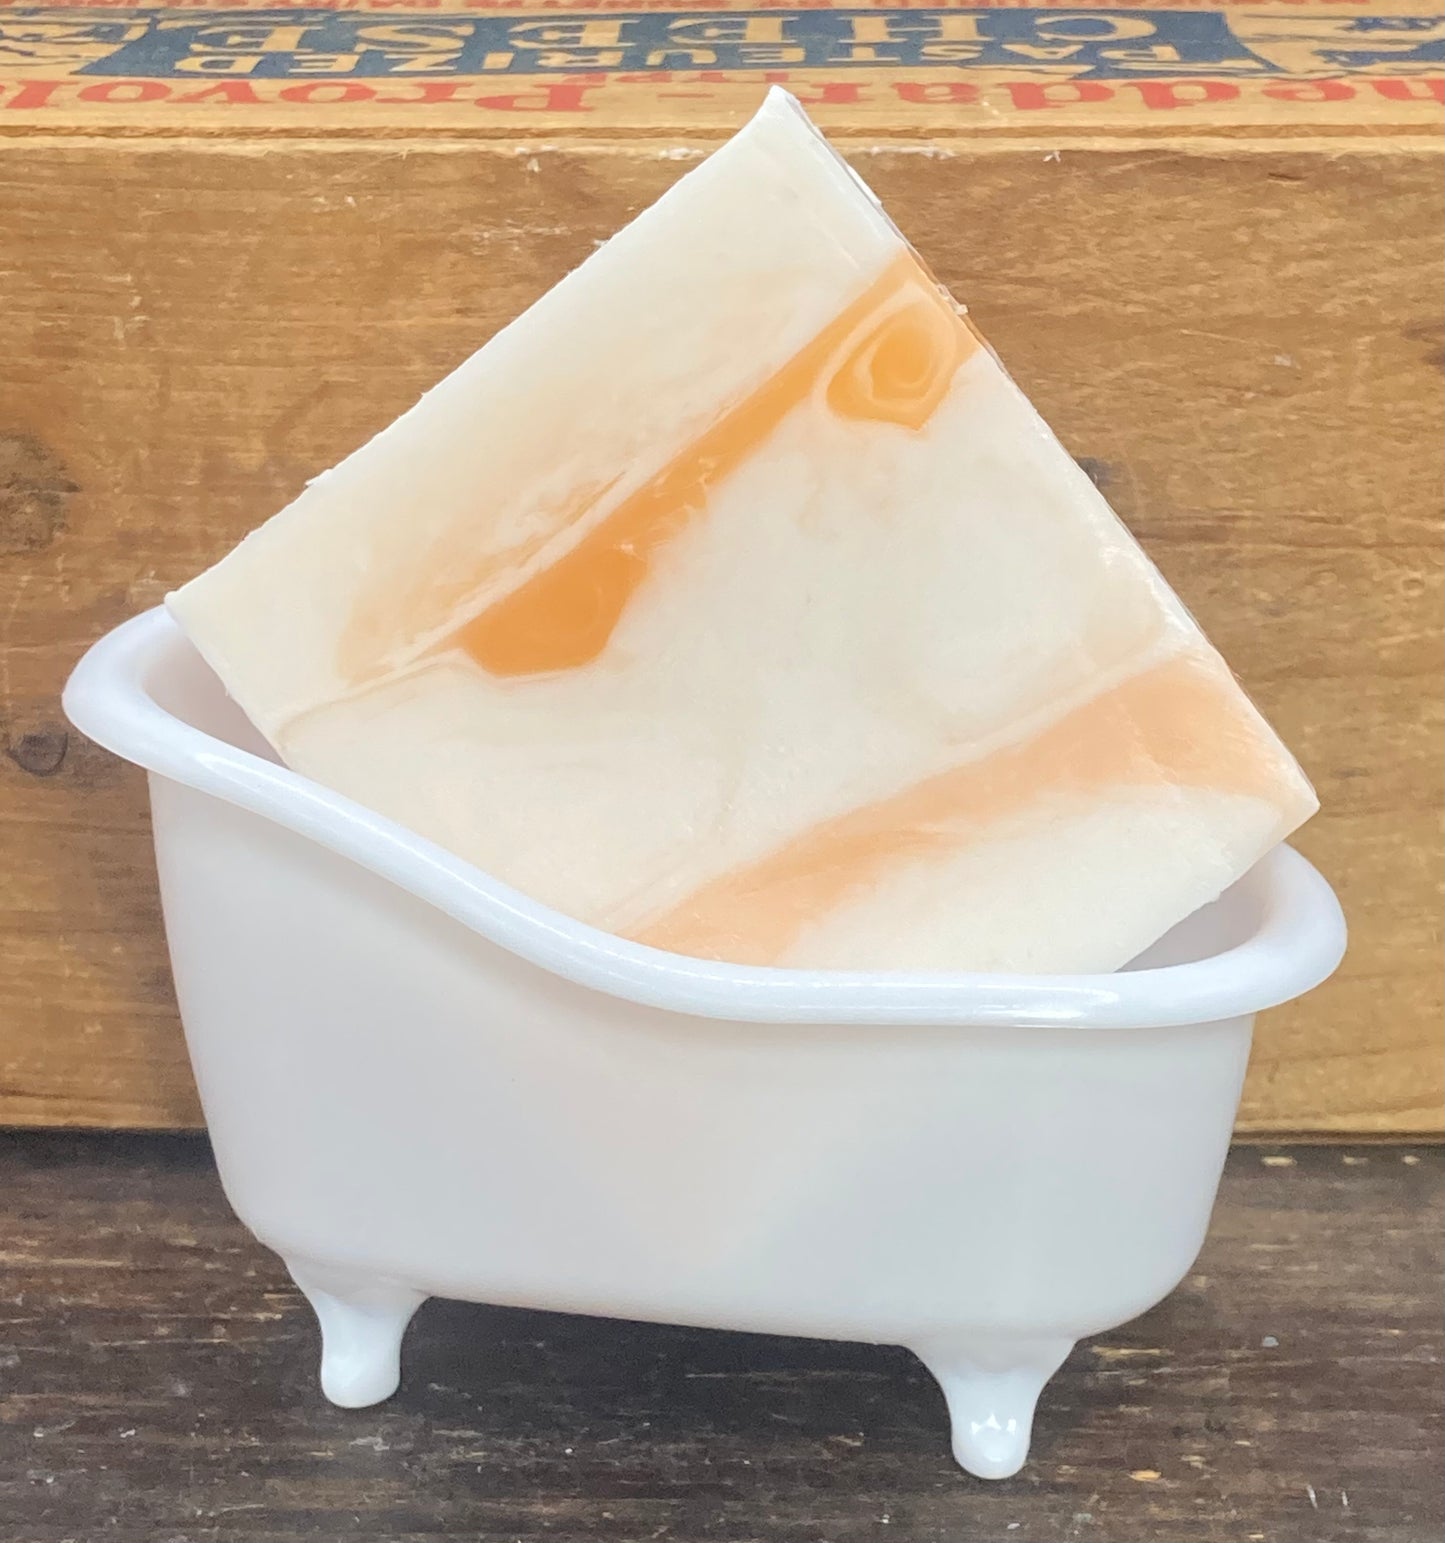 Summer Time!  This is a 4 oz bar of Georgia Peach scented Goats Milk Soap.  Perfect for Summer vacations!  Each item is individually made and may appear different from the photo.